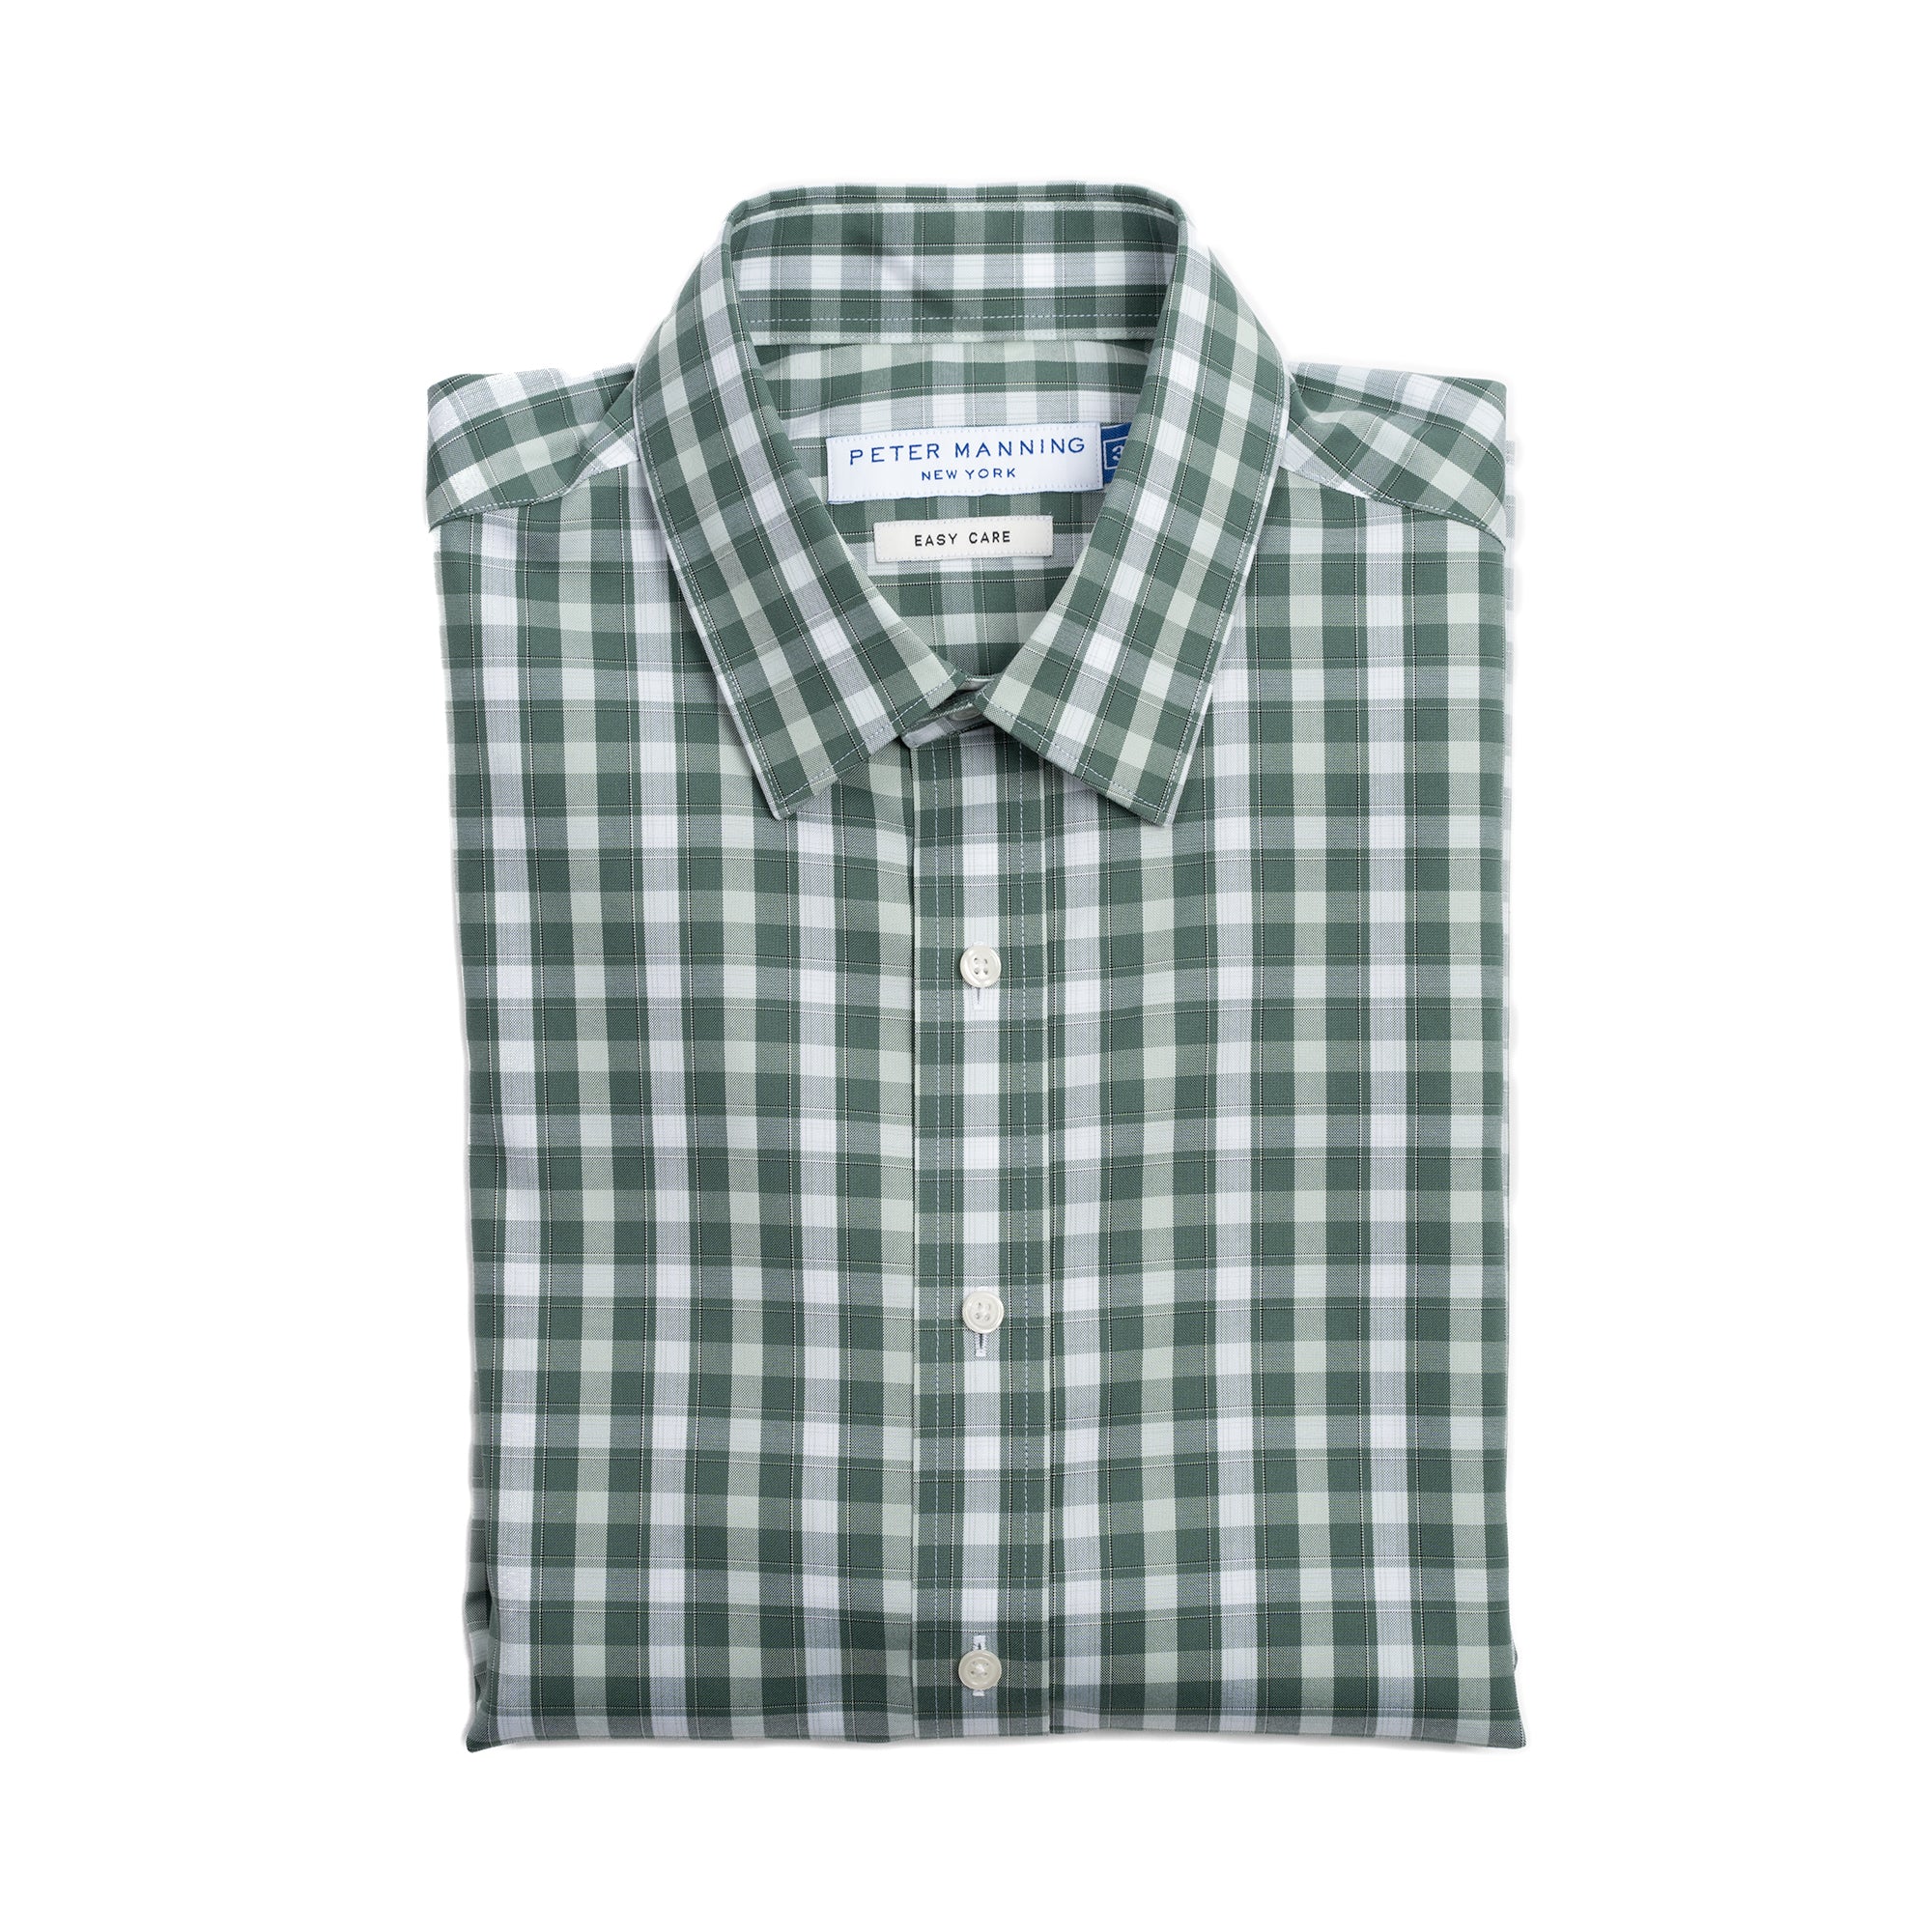 Easy Care Everyday Shirt - Olive Plaid